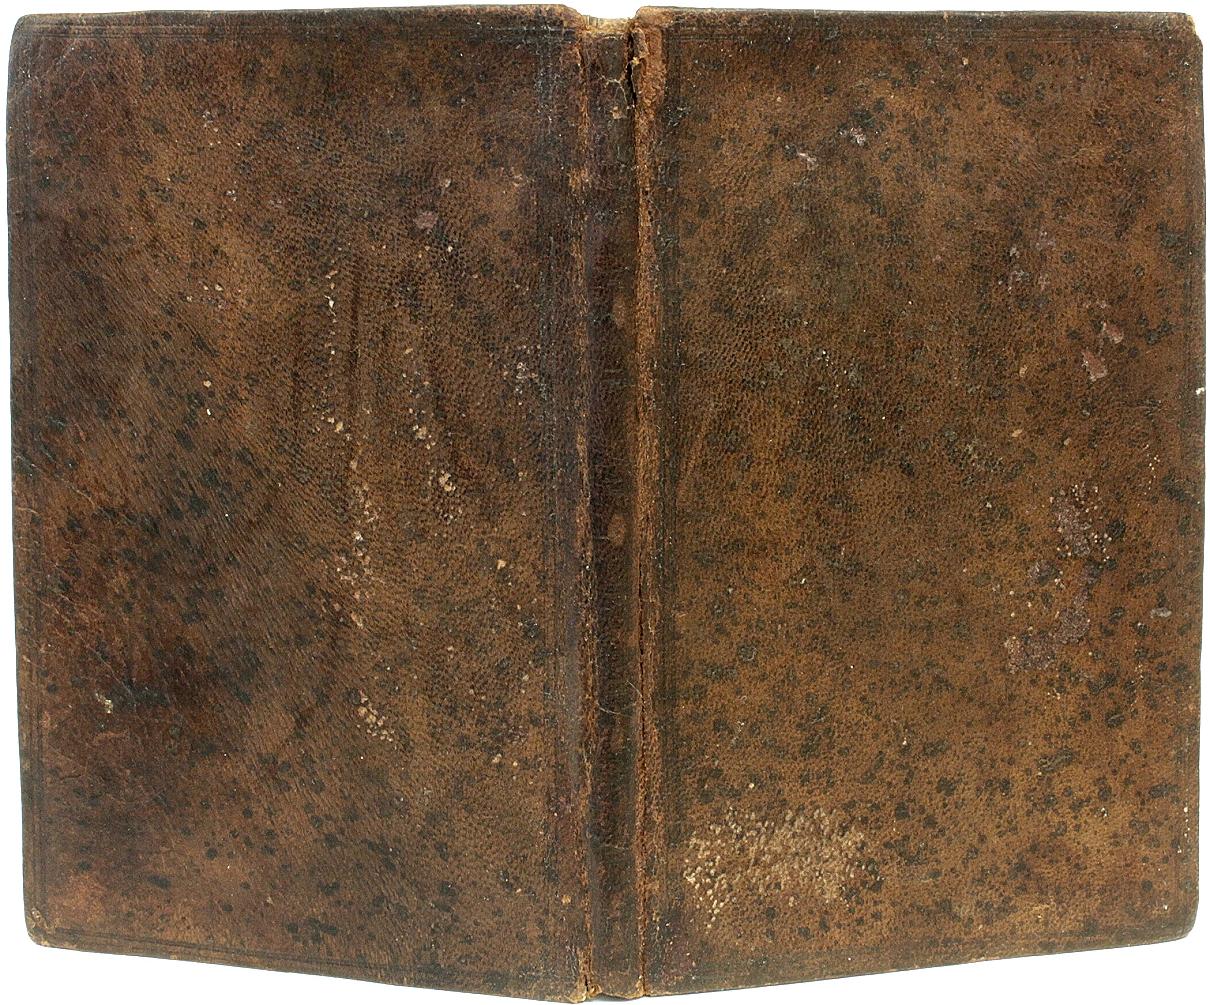 AUTHOR: COTTON, Charles. 

TITLE: The Wonders of The Peake.

PUBLISHER: London: for Joanna Brome, 1681.

DESCRIPTION: FIRST EDITION. 1 vol., 6-7/8